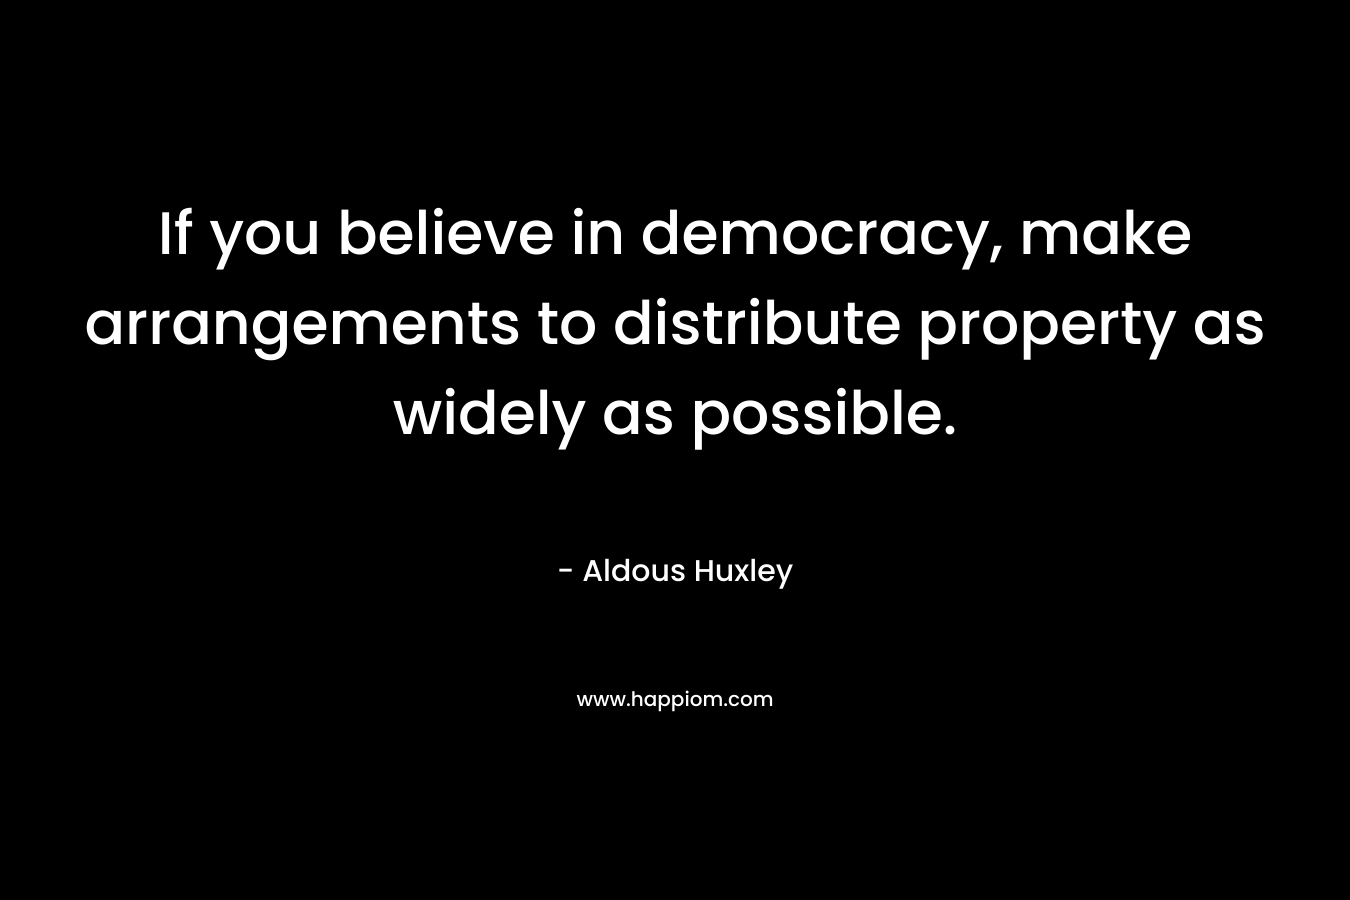 If you believe in democracy, make arrangements to distribute property as widely as possible. – Aldous Huxley